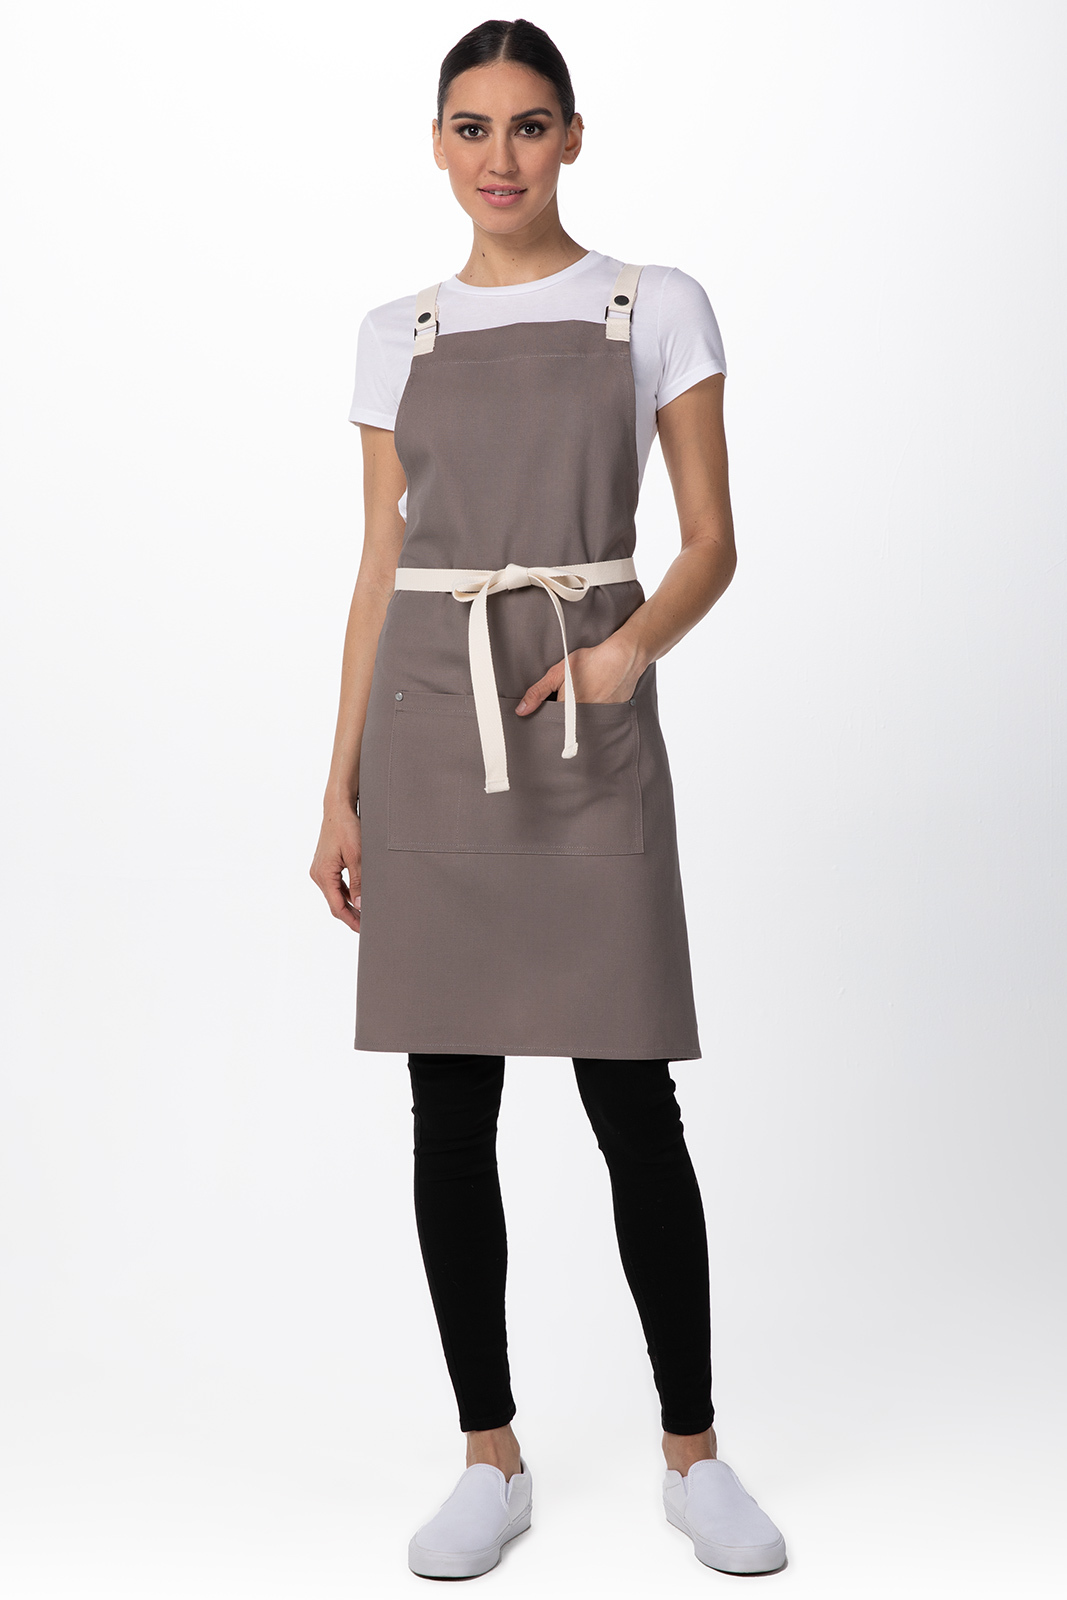 Chef Works Canvas Cross-Back Grey Apron